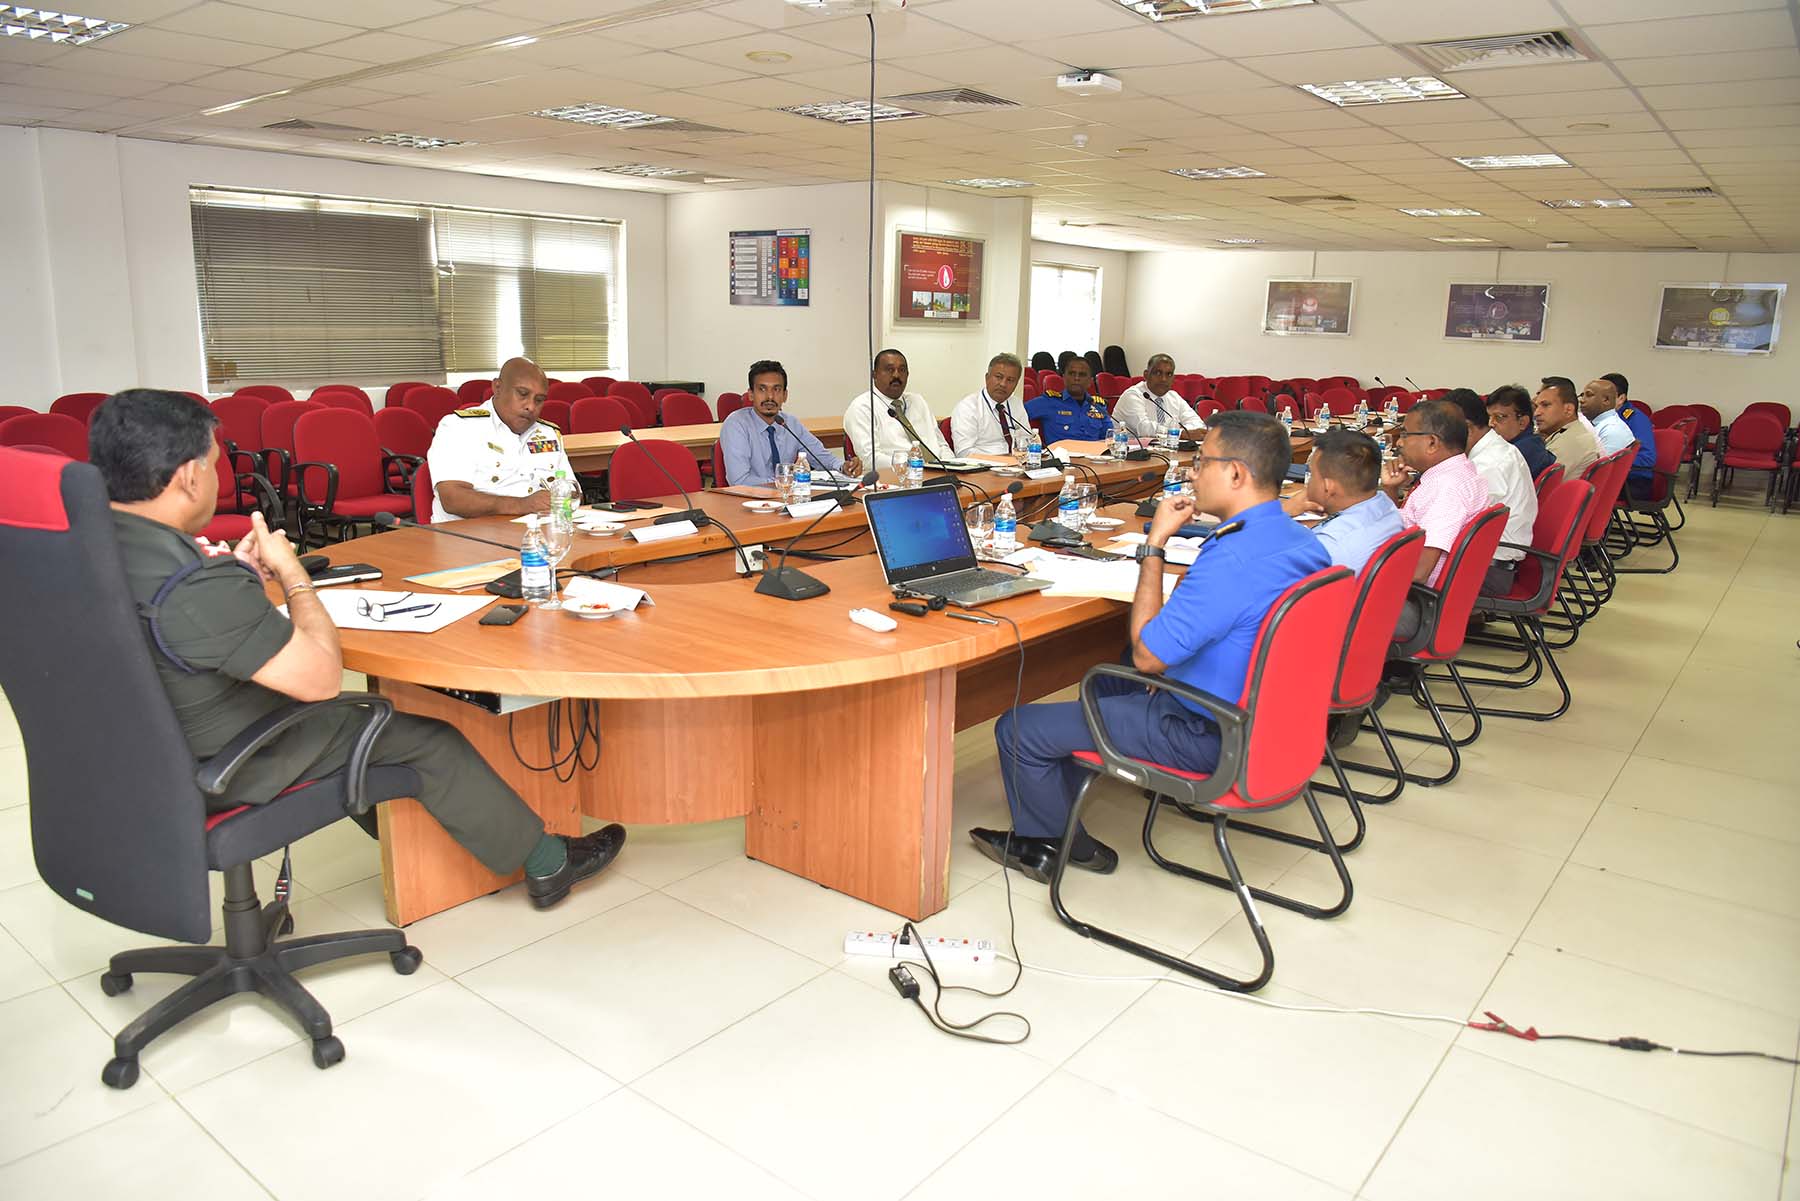 Meeting on Conducting Program Related to Humanitarian Assistance and Disaster Relief HADR 3